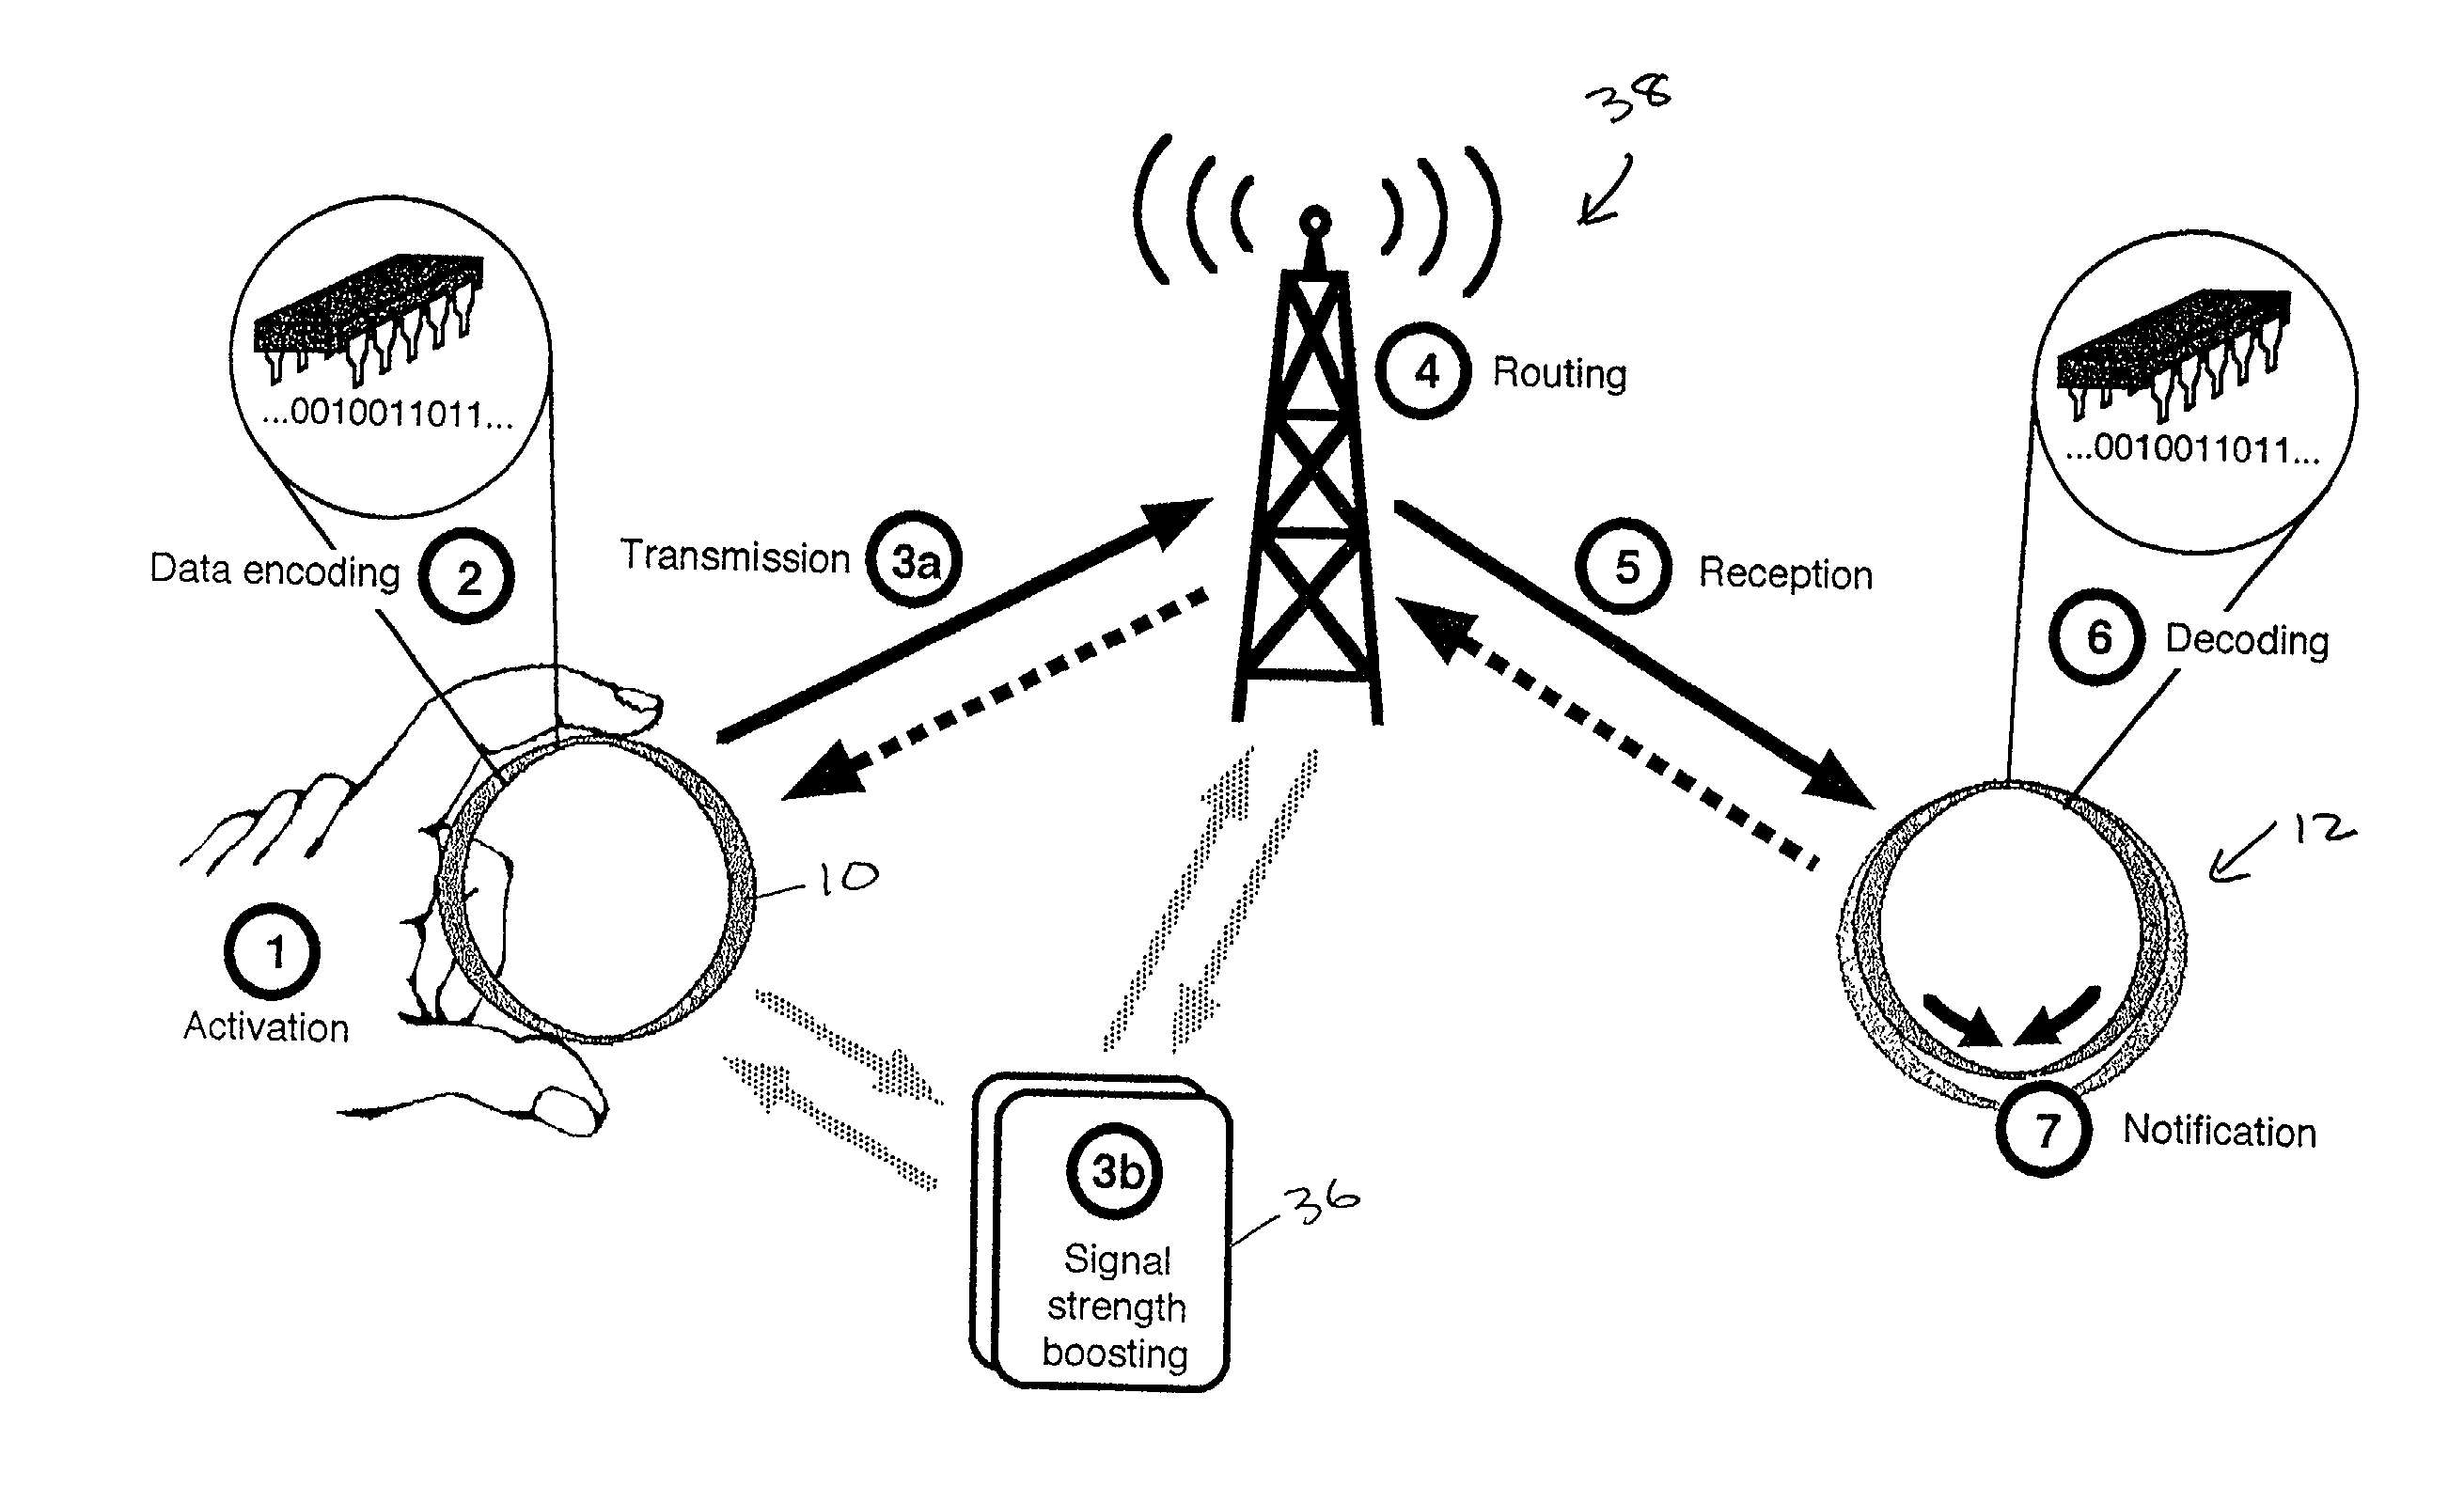 State adaptation devices and methods for wireless communications